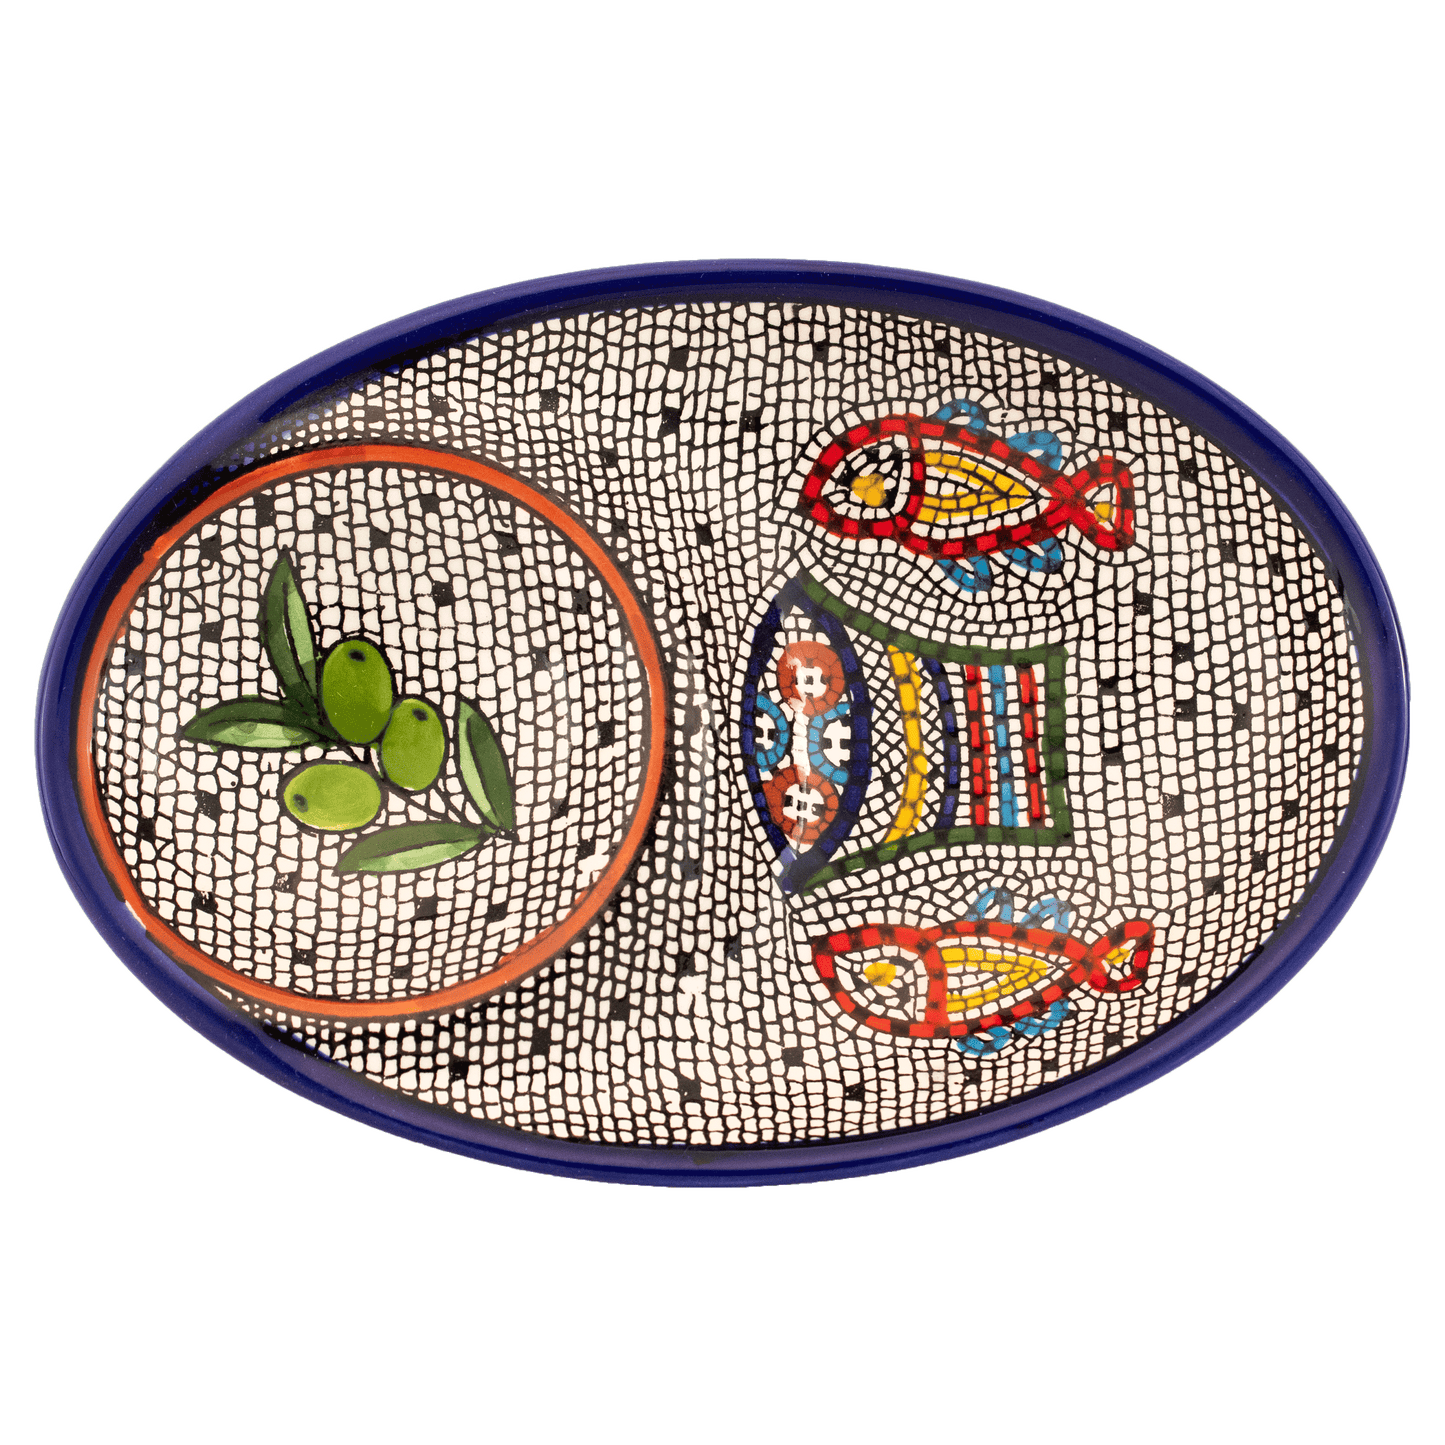 Armenian dipping dish with mosaic design of a basket of loaves two fish and olives